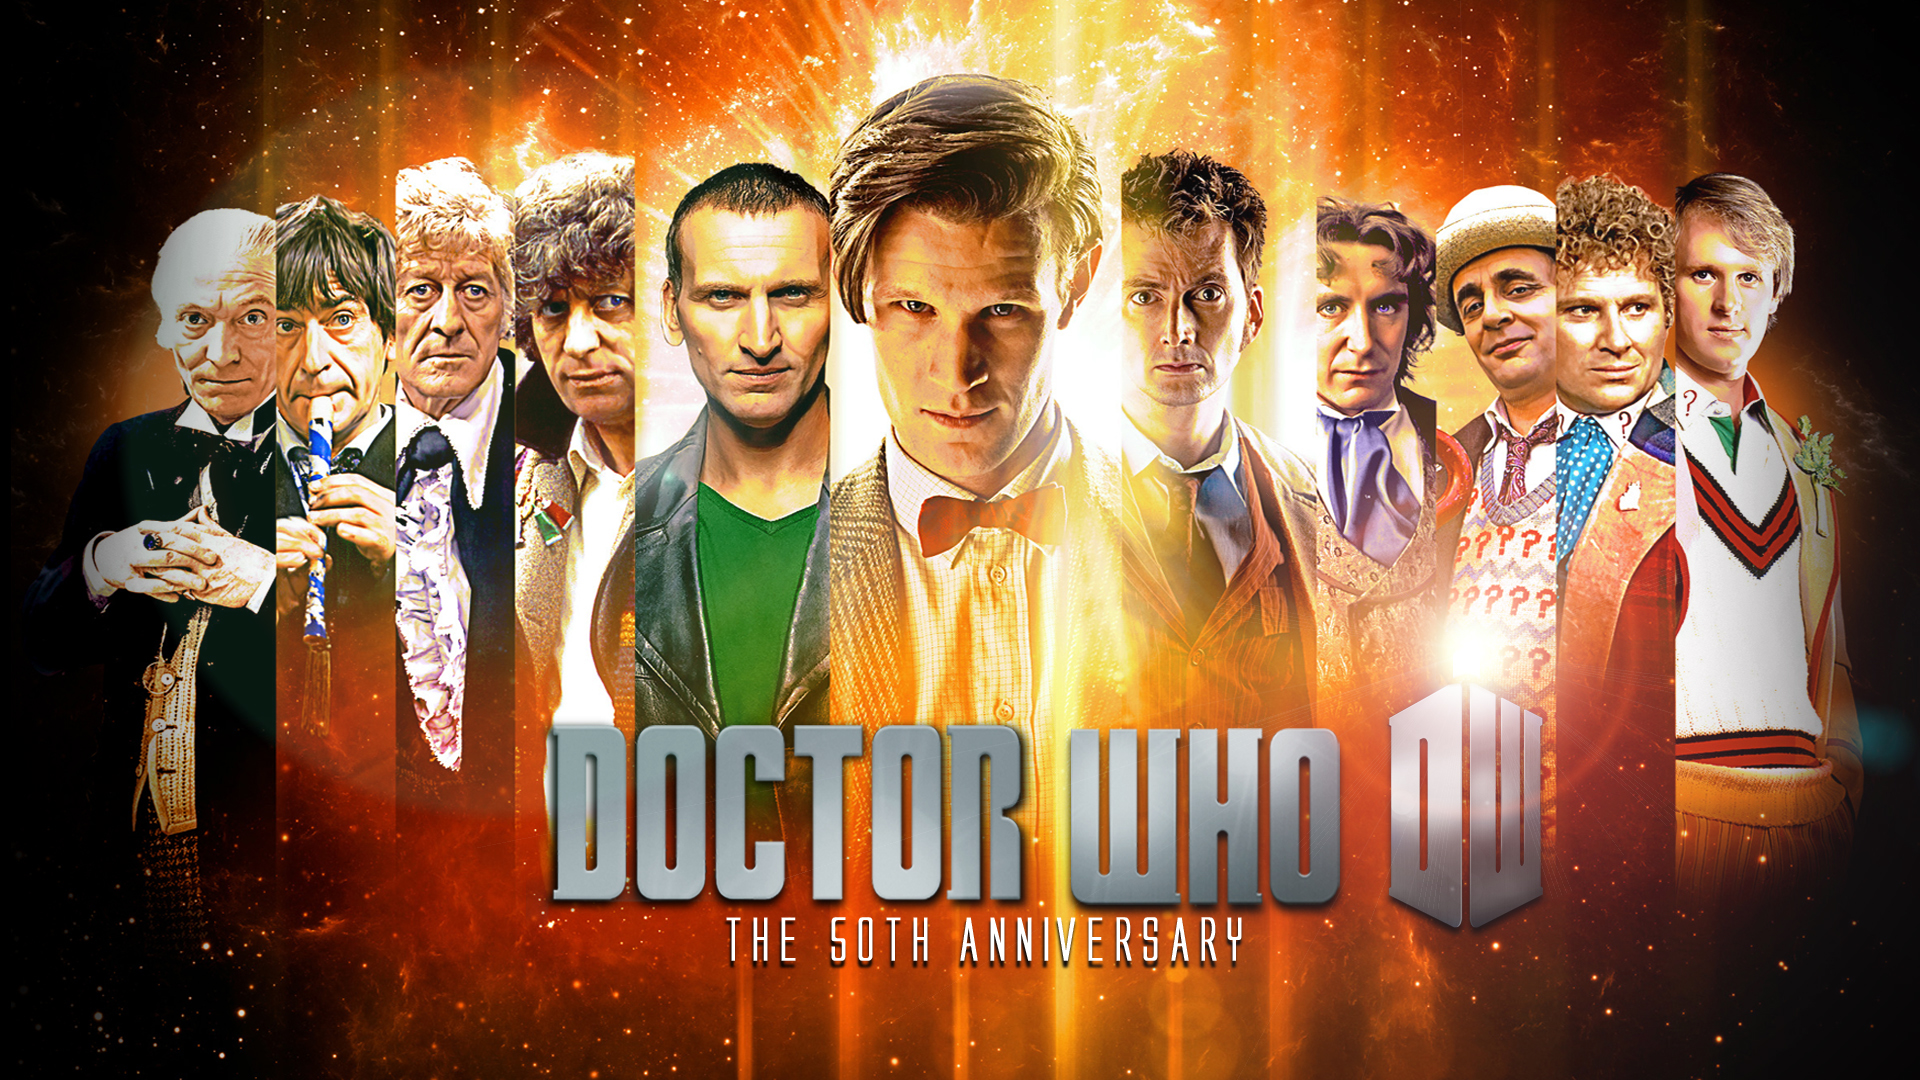 Doctor Who Image The 50th Anniversary Wallpaper Photos